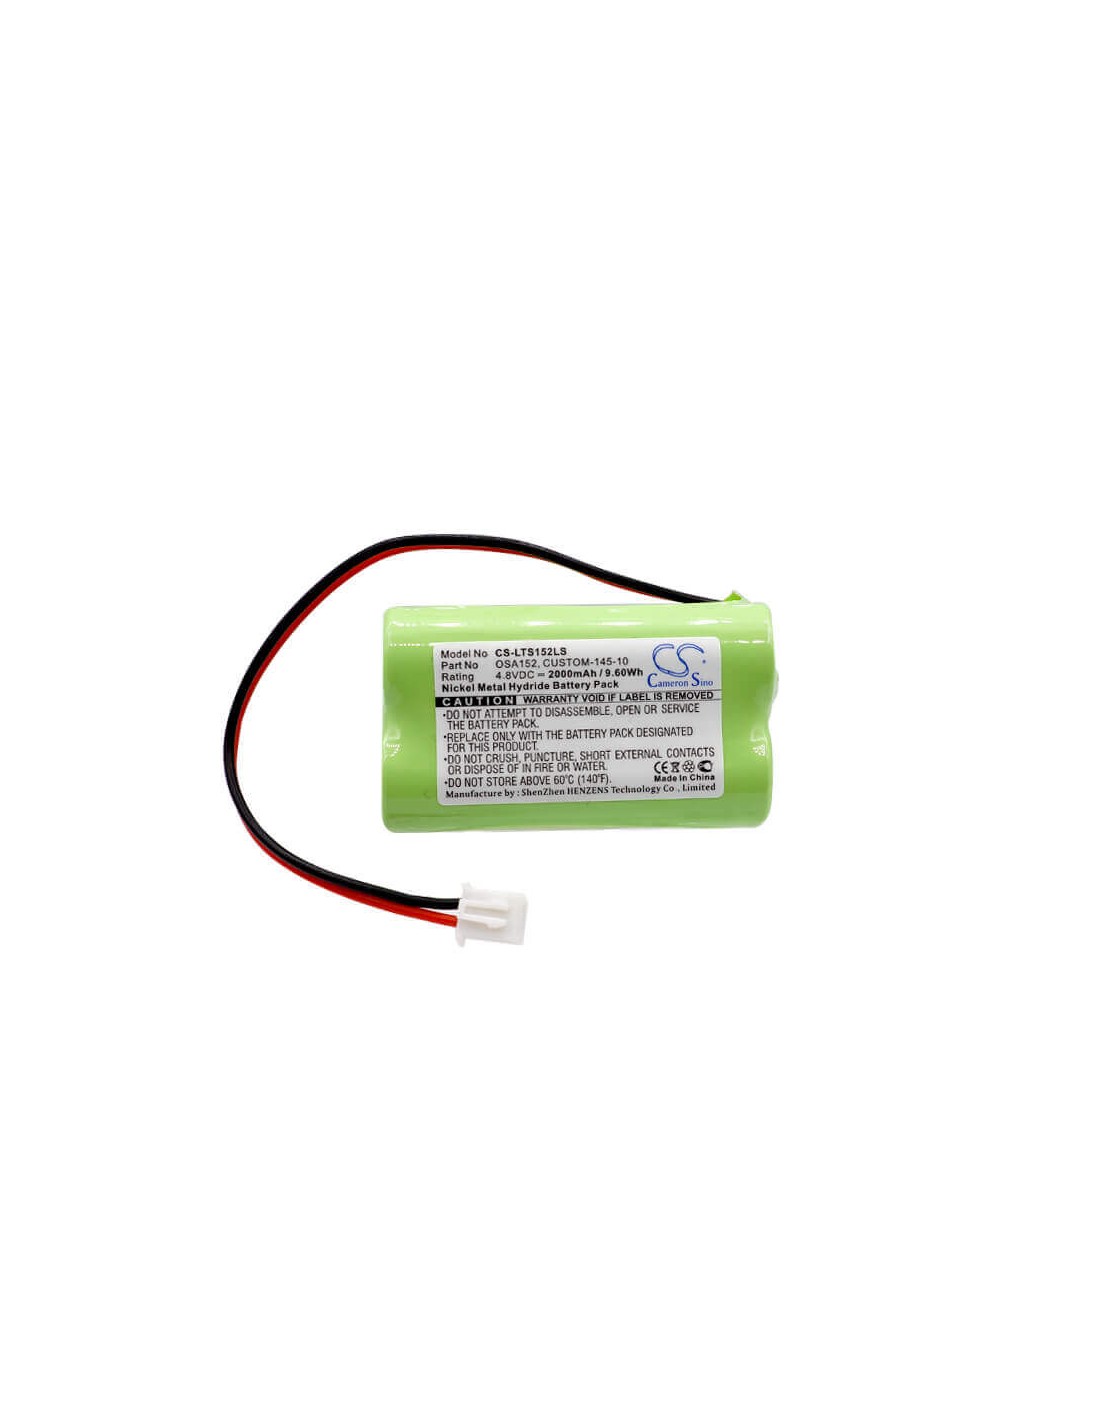 Battery for Lithonia, D-aa650bx4, Exit Signs, Lithonia Daybright D-aa650 4.8V, 2000mAh - 9.60Wh